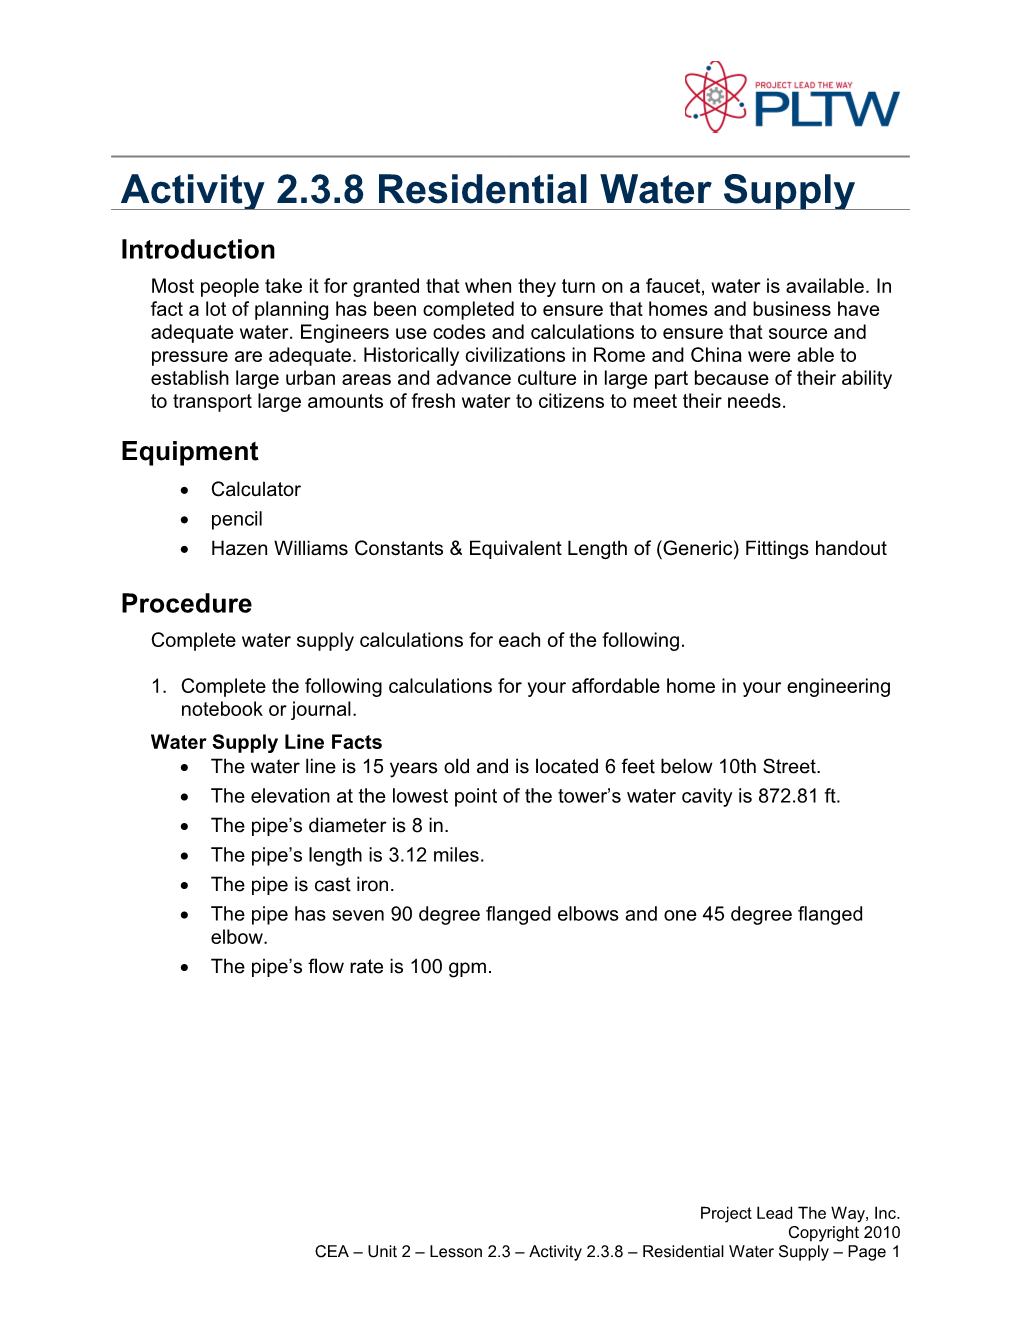 Activity 2.3.8 Residential Water Supply